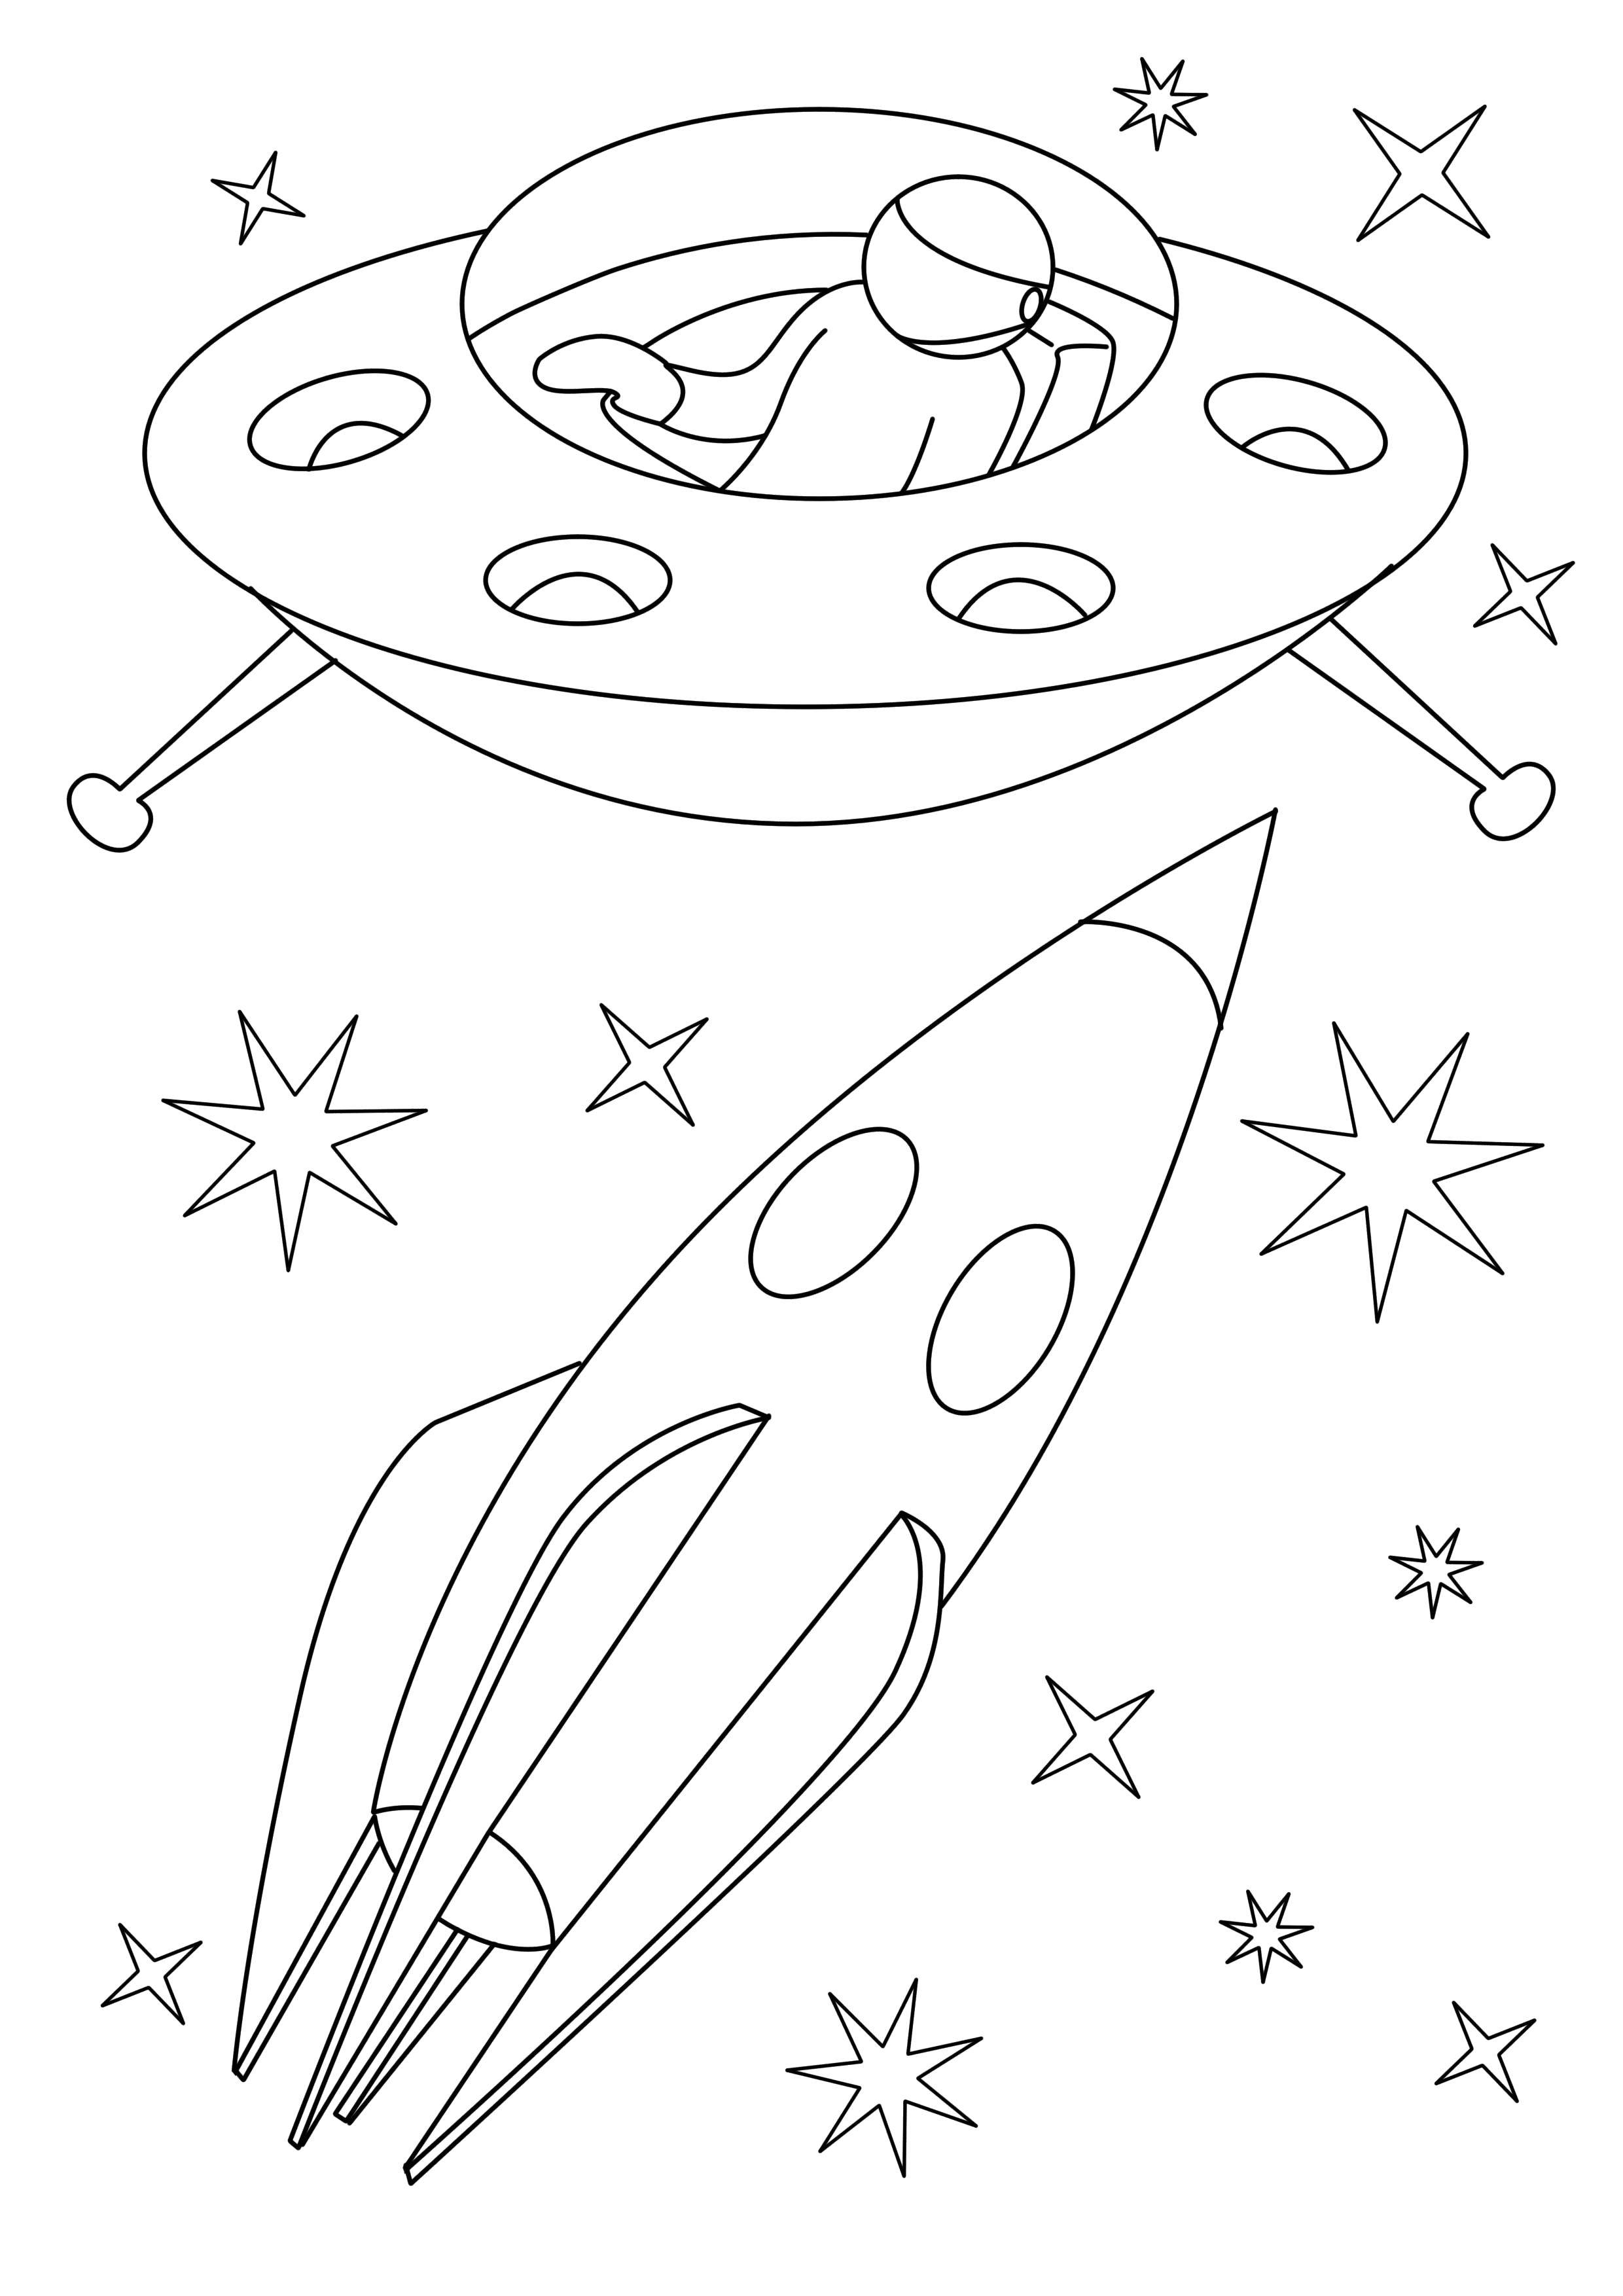 Coloring Flying saucer and the rocket was found in space. Category space. Tags:  Space, rocket, stars, UFO.